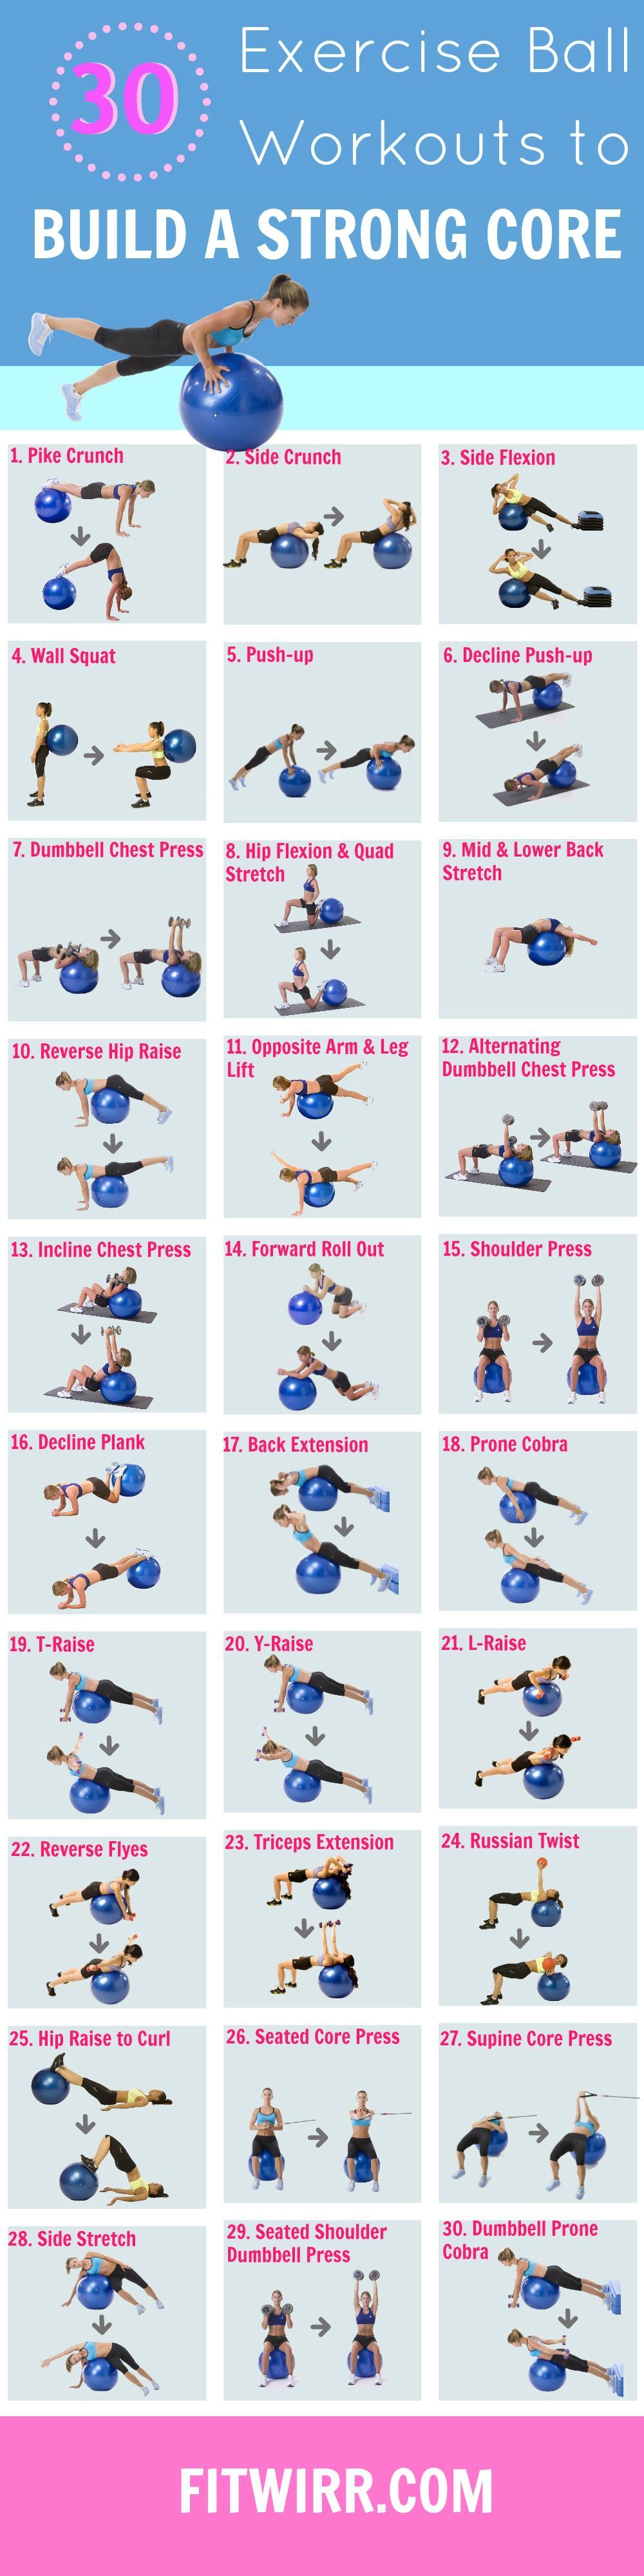 Stability ball workouts